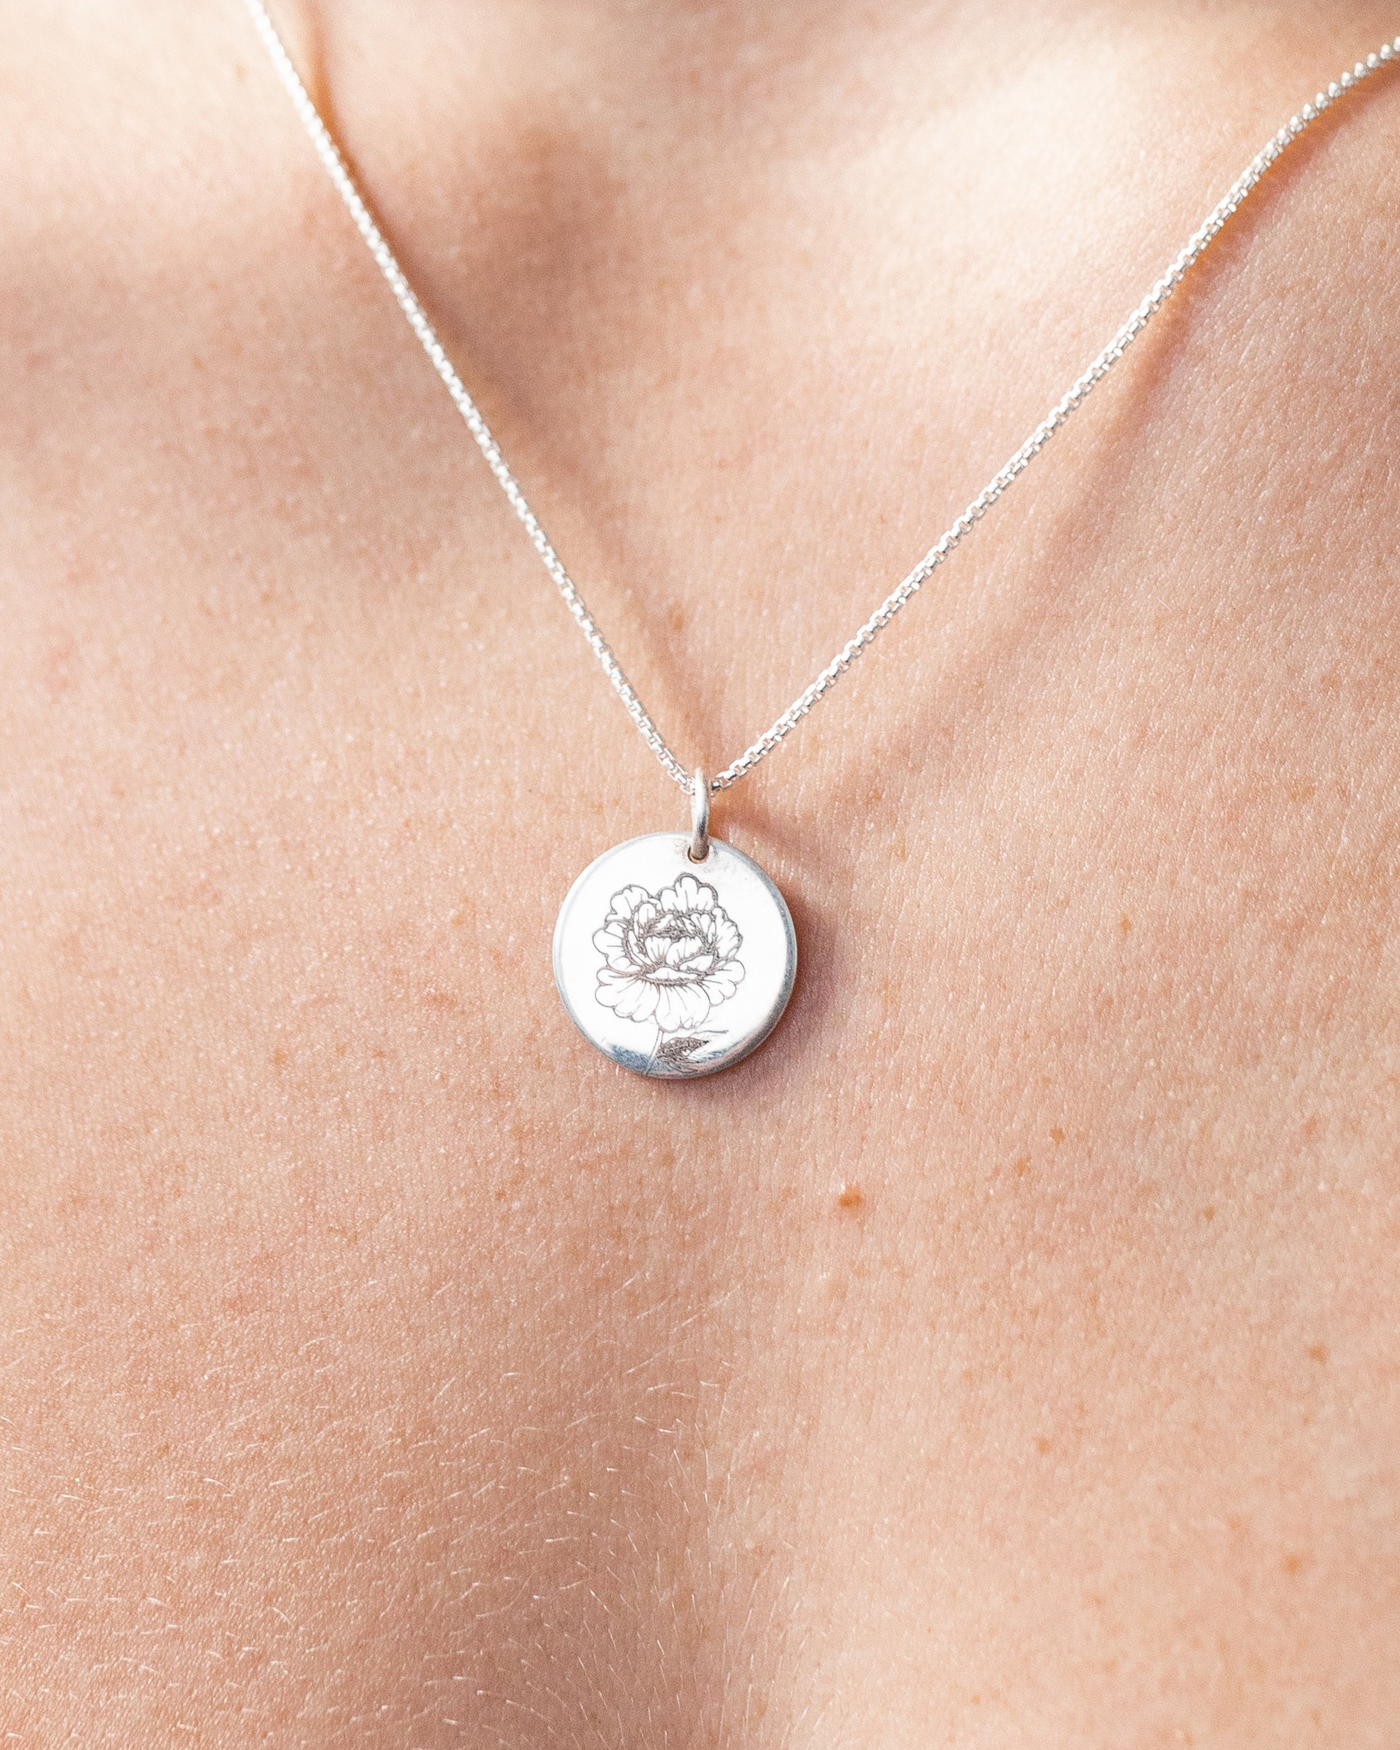 Close-up, front view of Close By Me's Circle Necklace with Birth Flower Engraving in Sterling Silver, set against a solid white background.